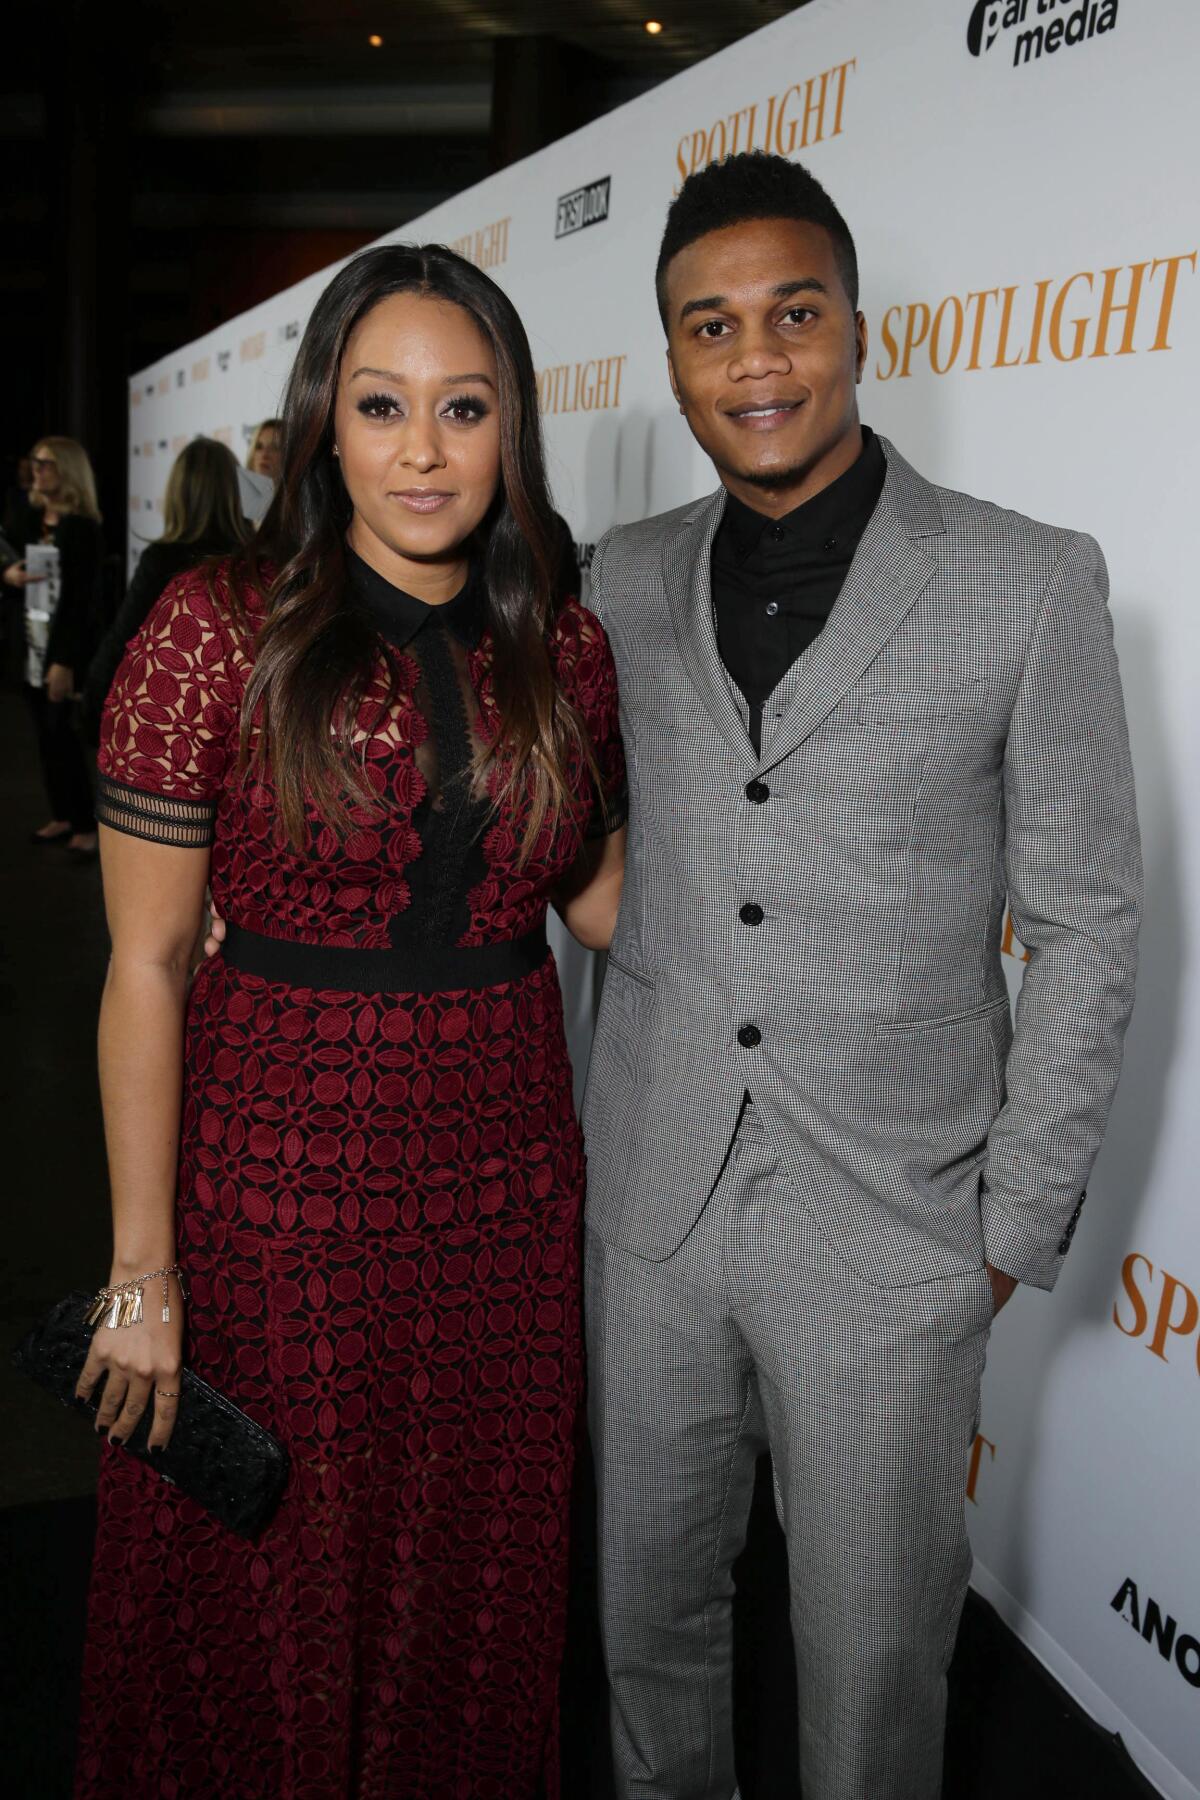 A woman in a red dress and a man in a gray suit stand and pose together